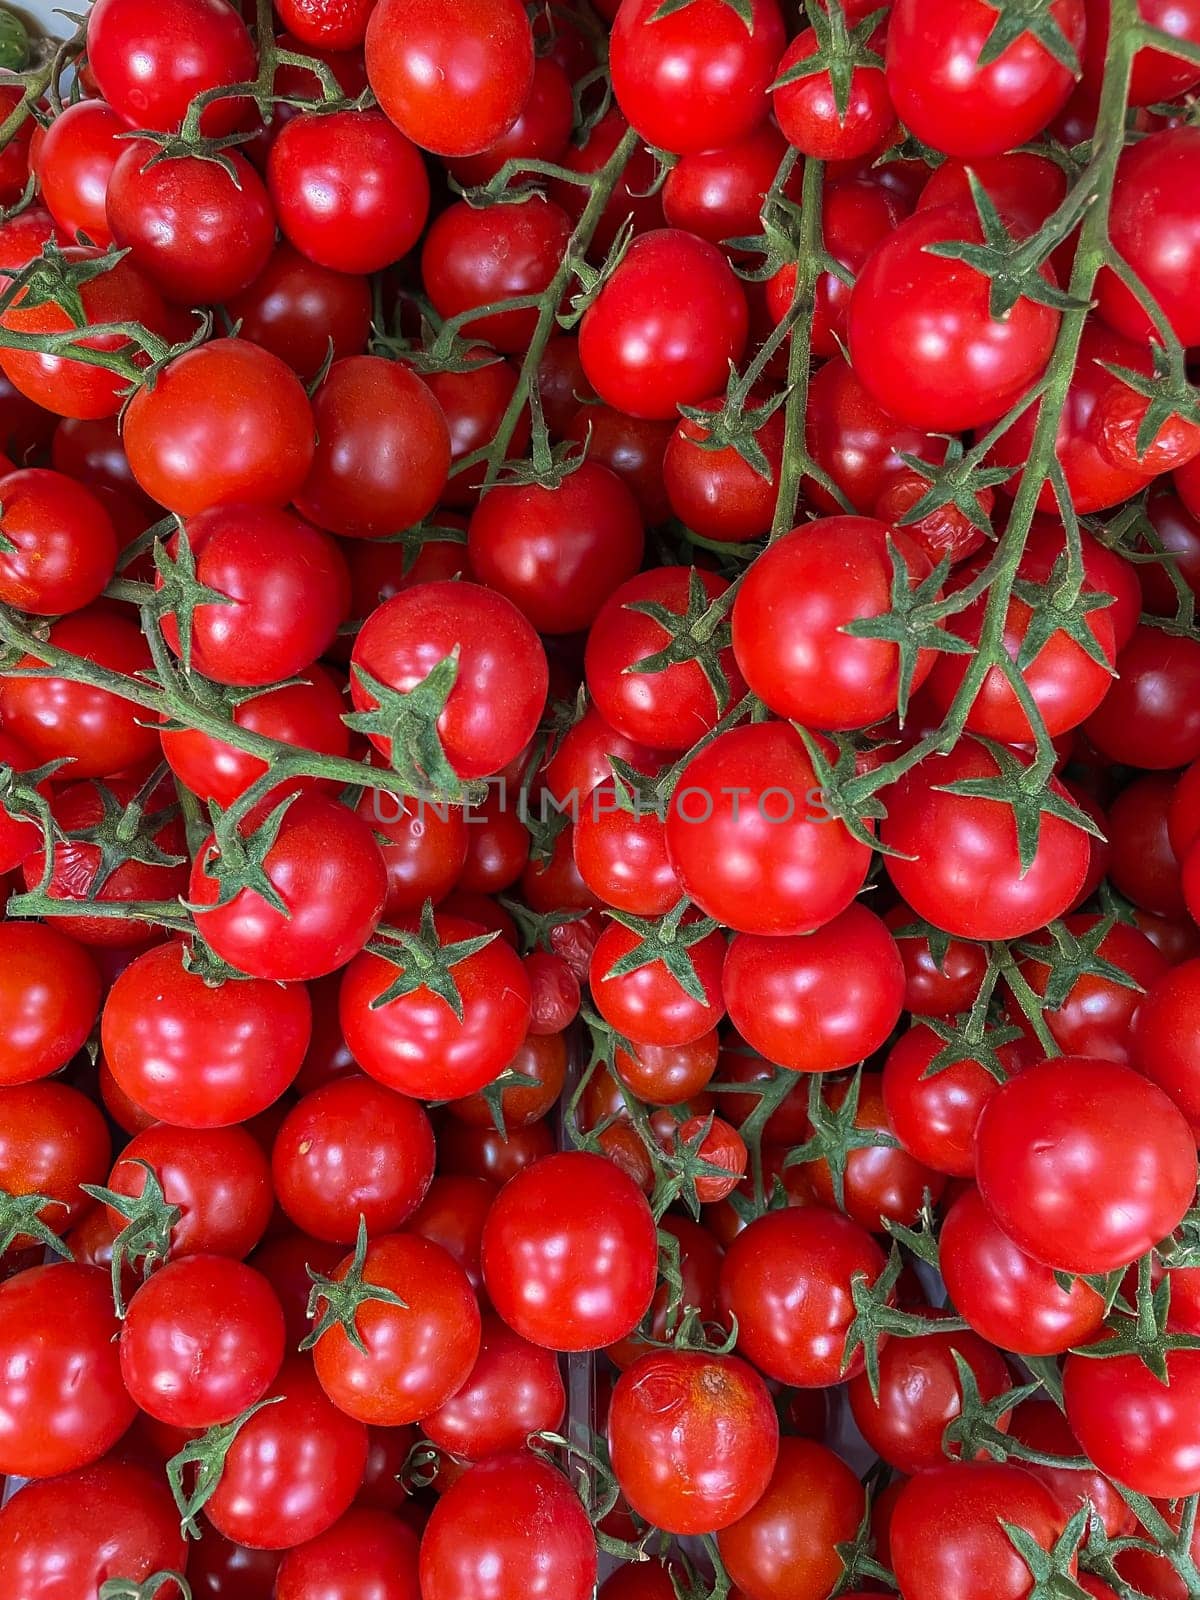 lots of ripe red tomato vitamins healthy nutrition vegetables as background by Simakov